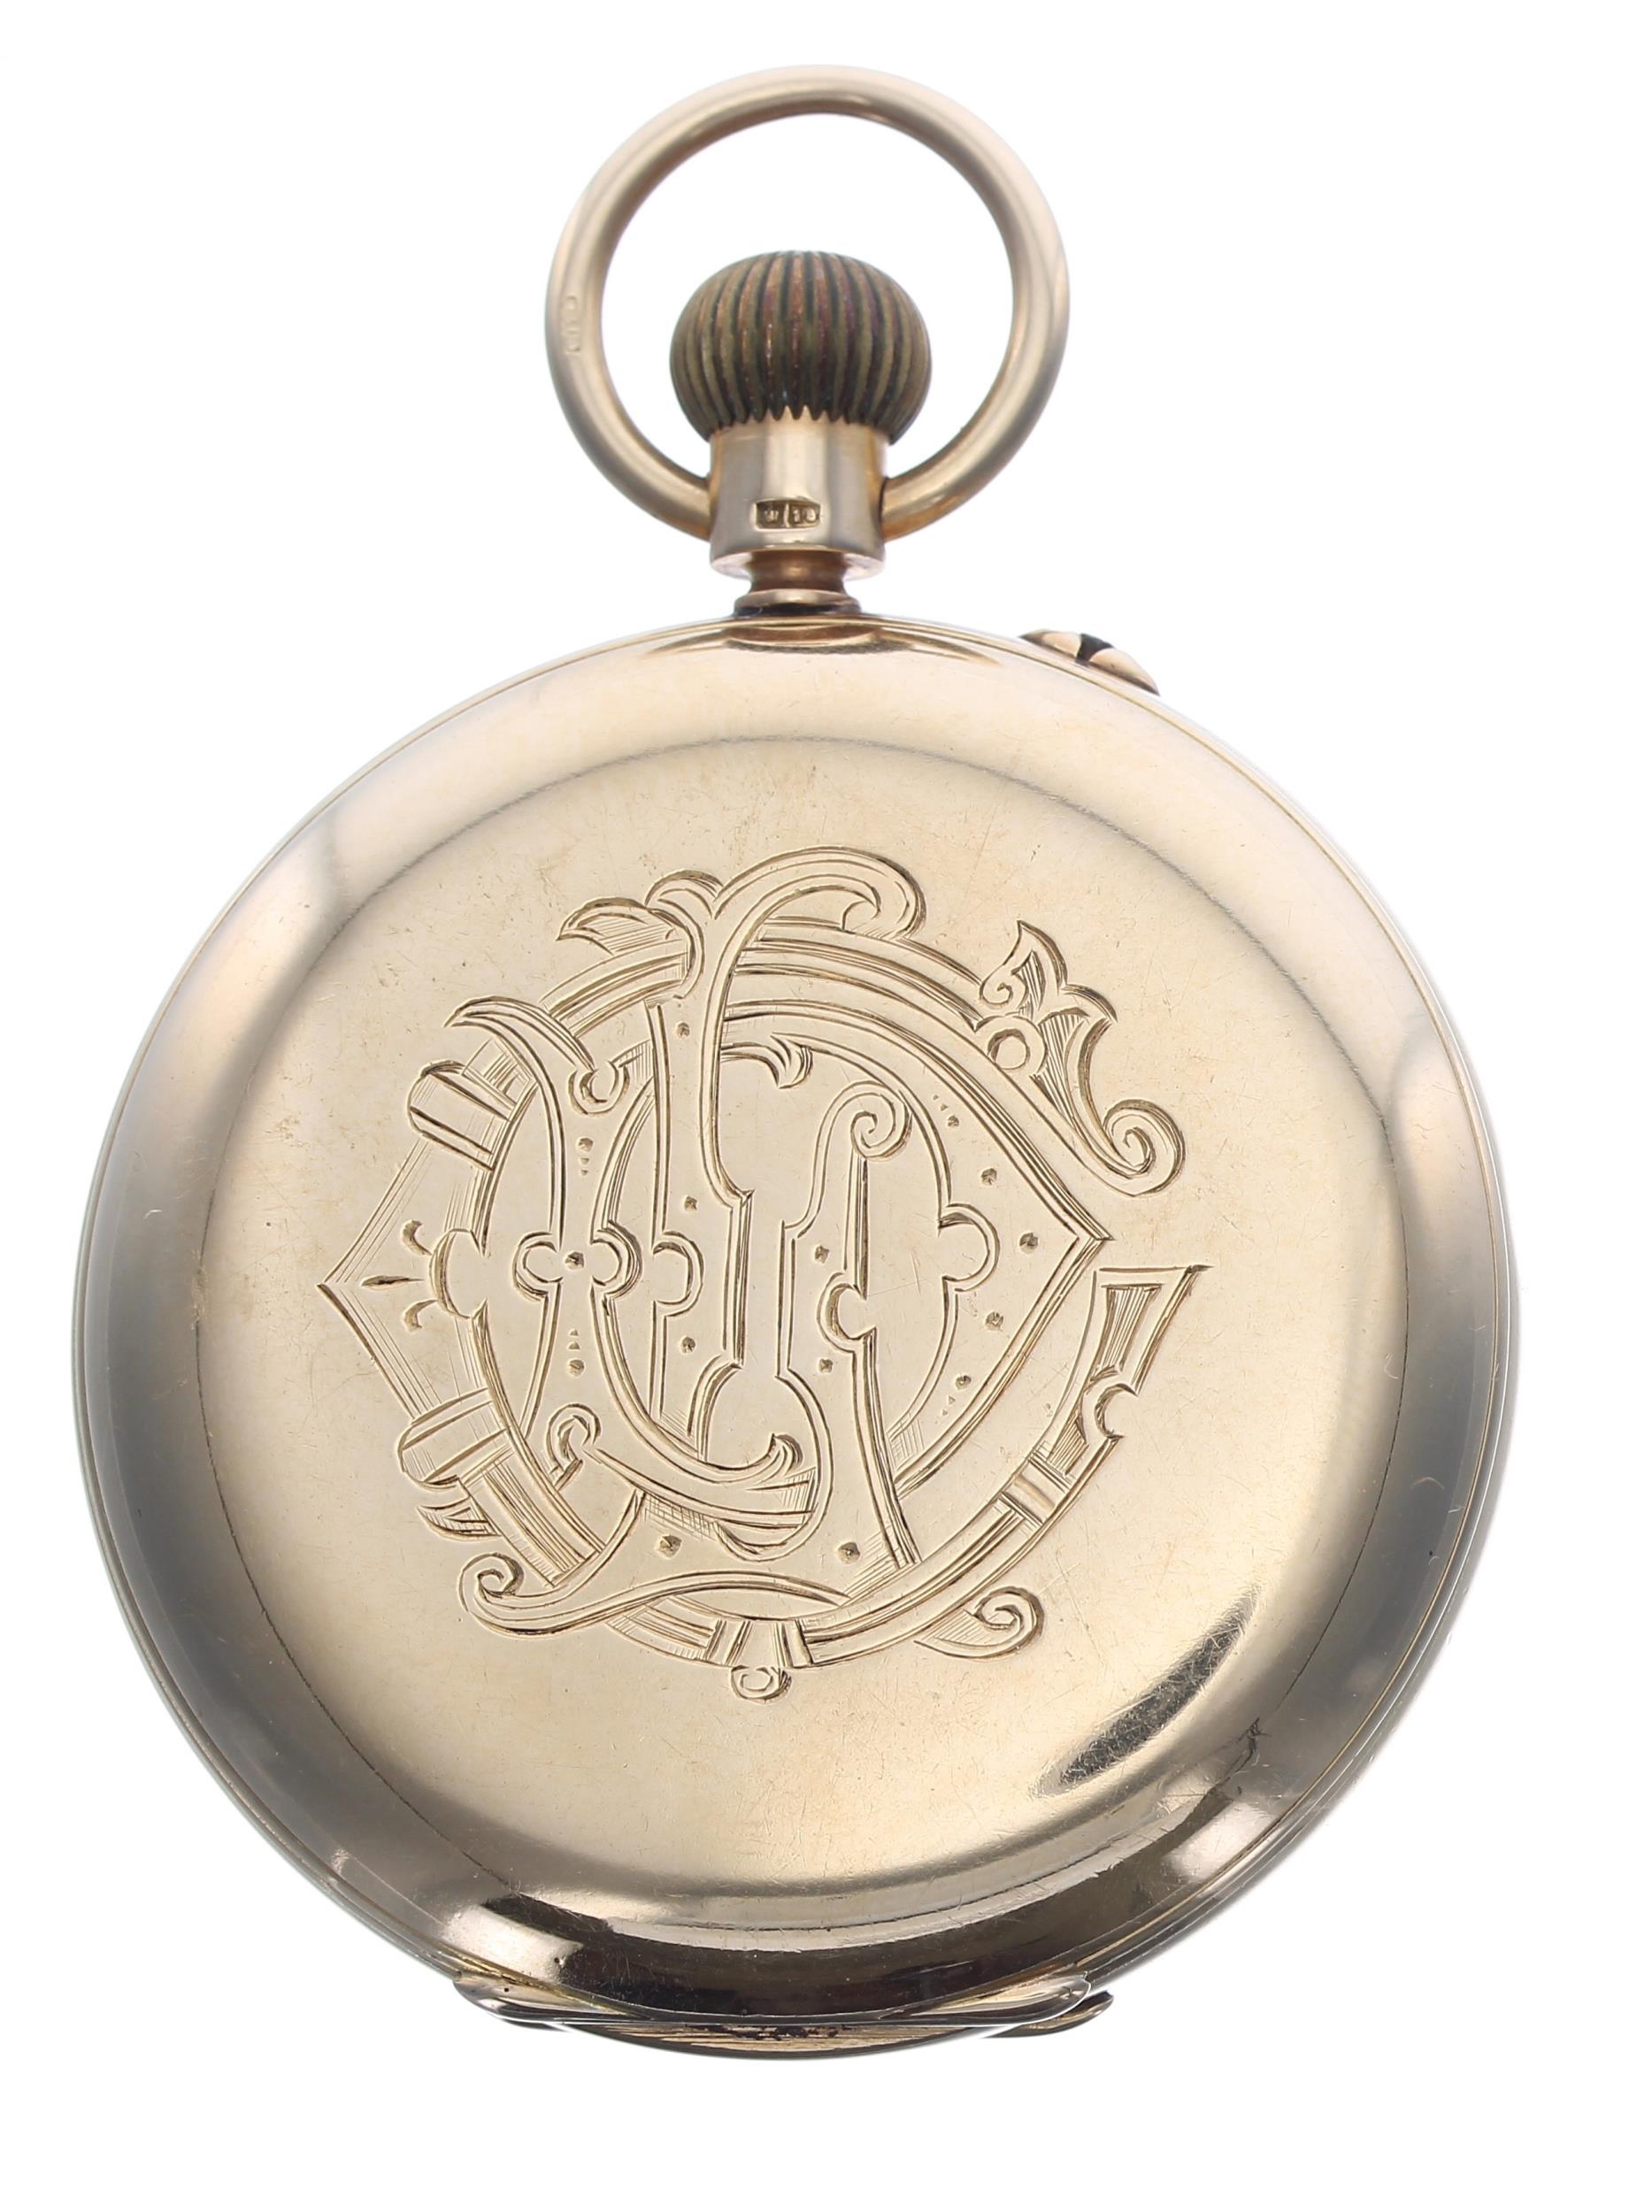 Late 19th century Bryer & Sons 18ct lever hunter pocket watch, London 1899, gilt three quarter plate - Image 2 of 5